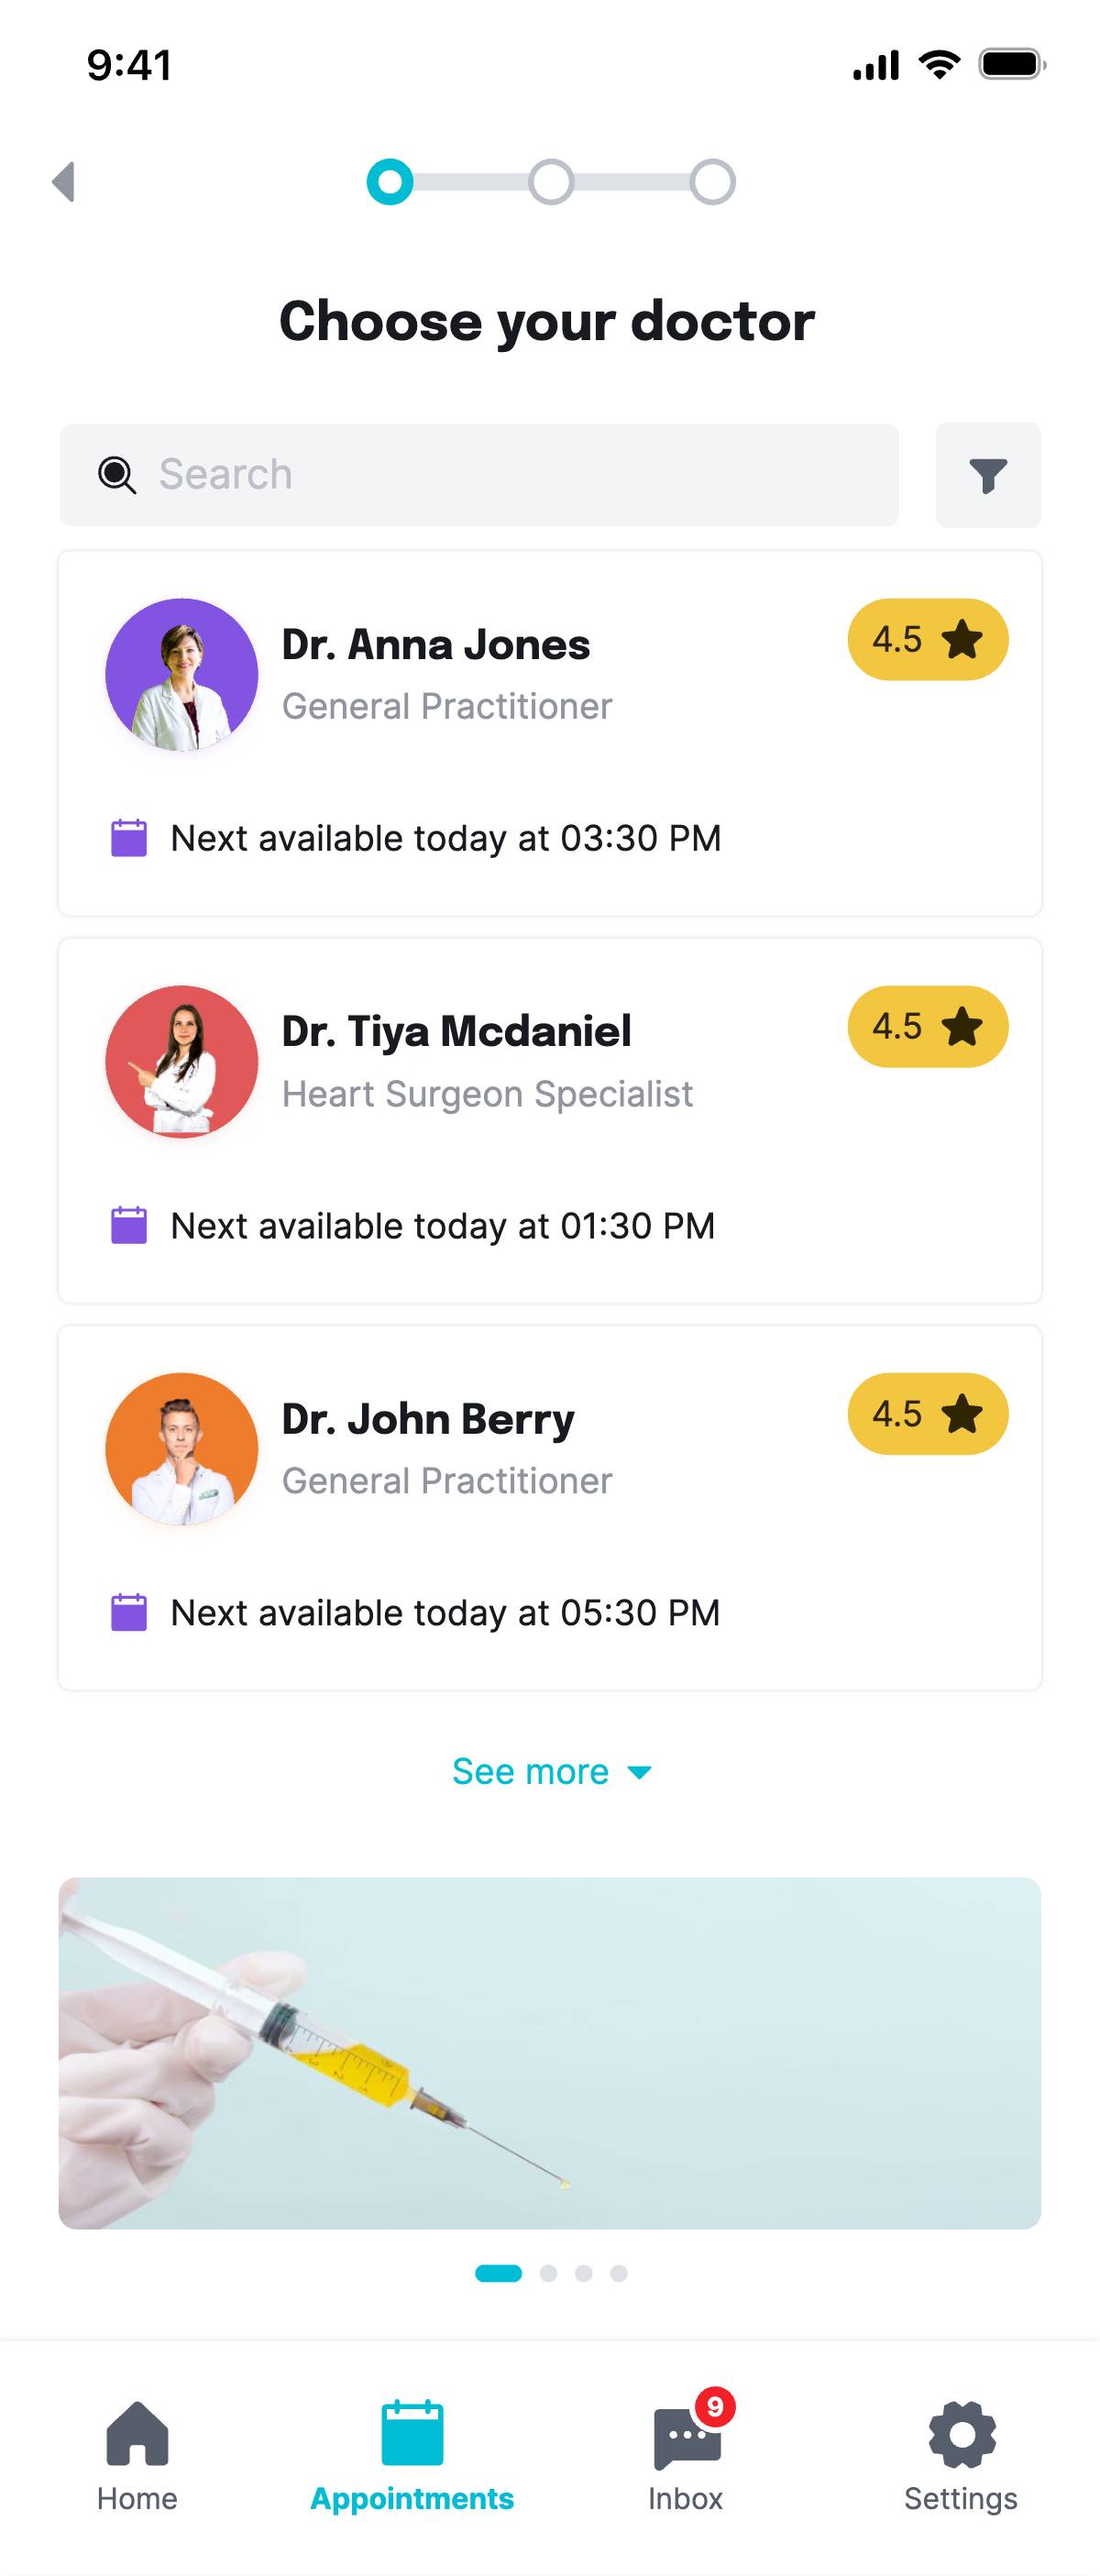 Service booking - Choose doctor